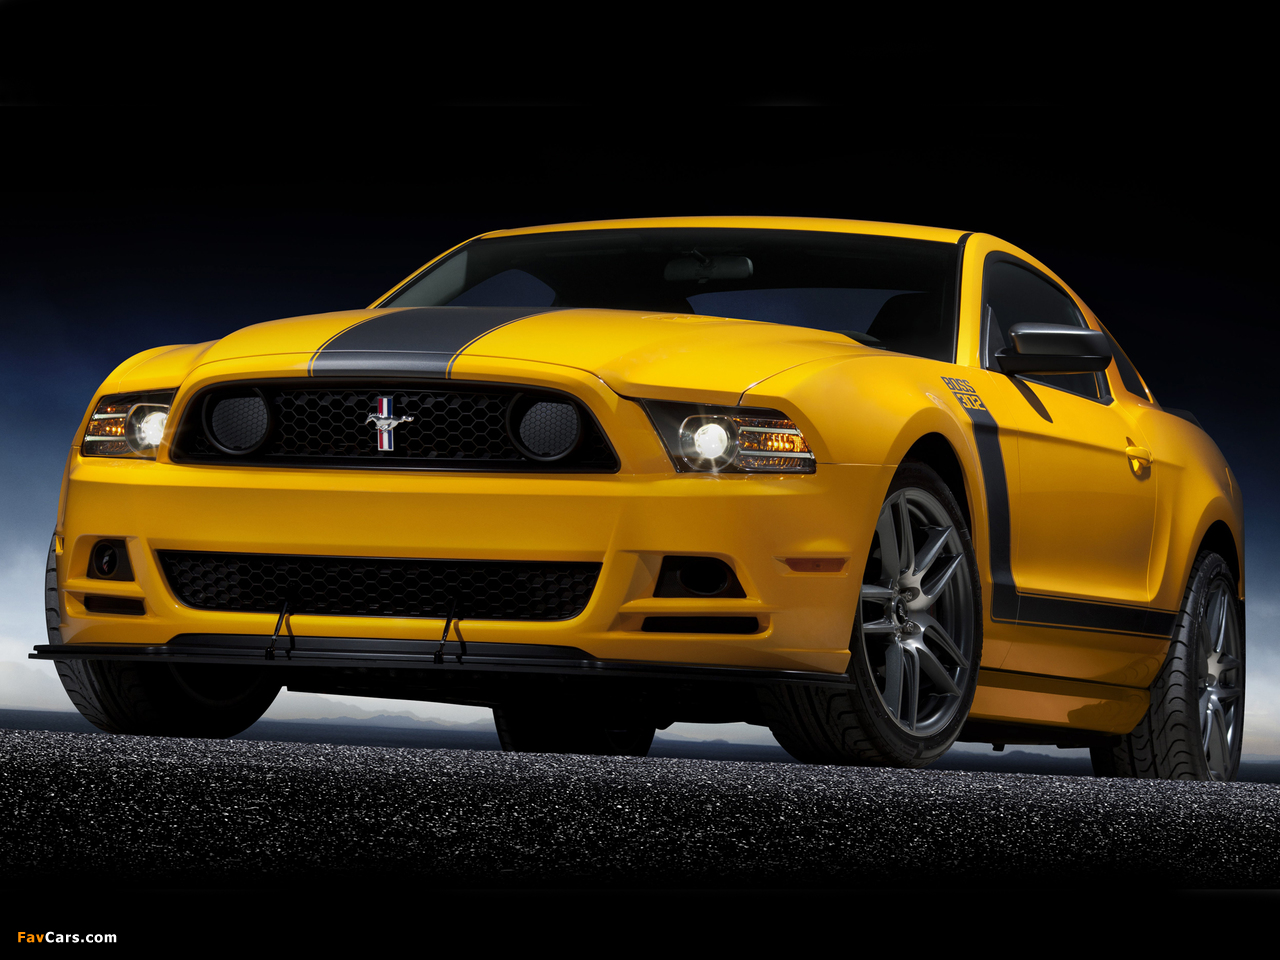 Used 2013 Ford Mustang Boss 302 Pricing - Edmunds.com